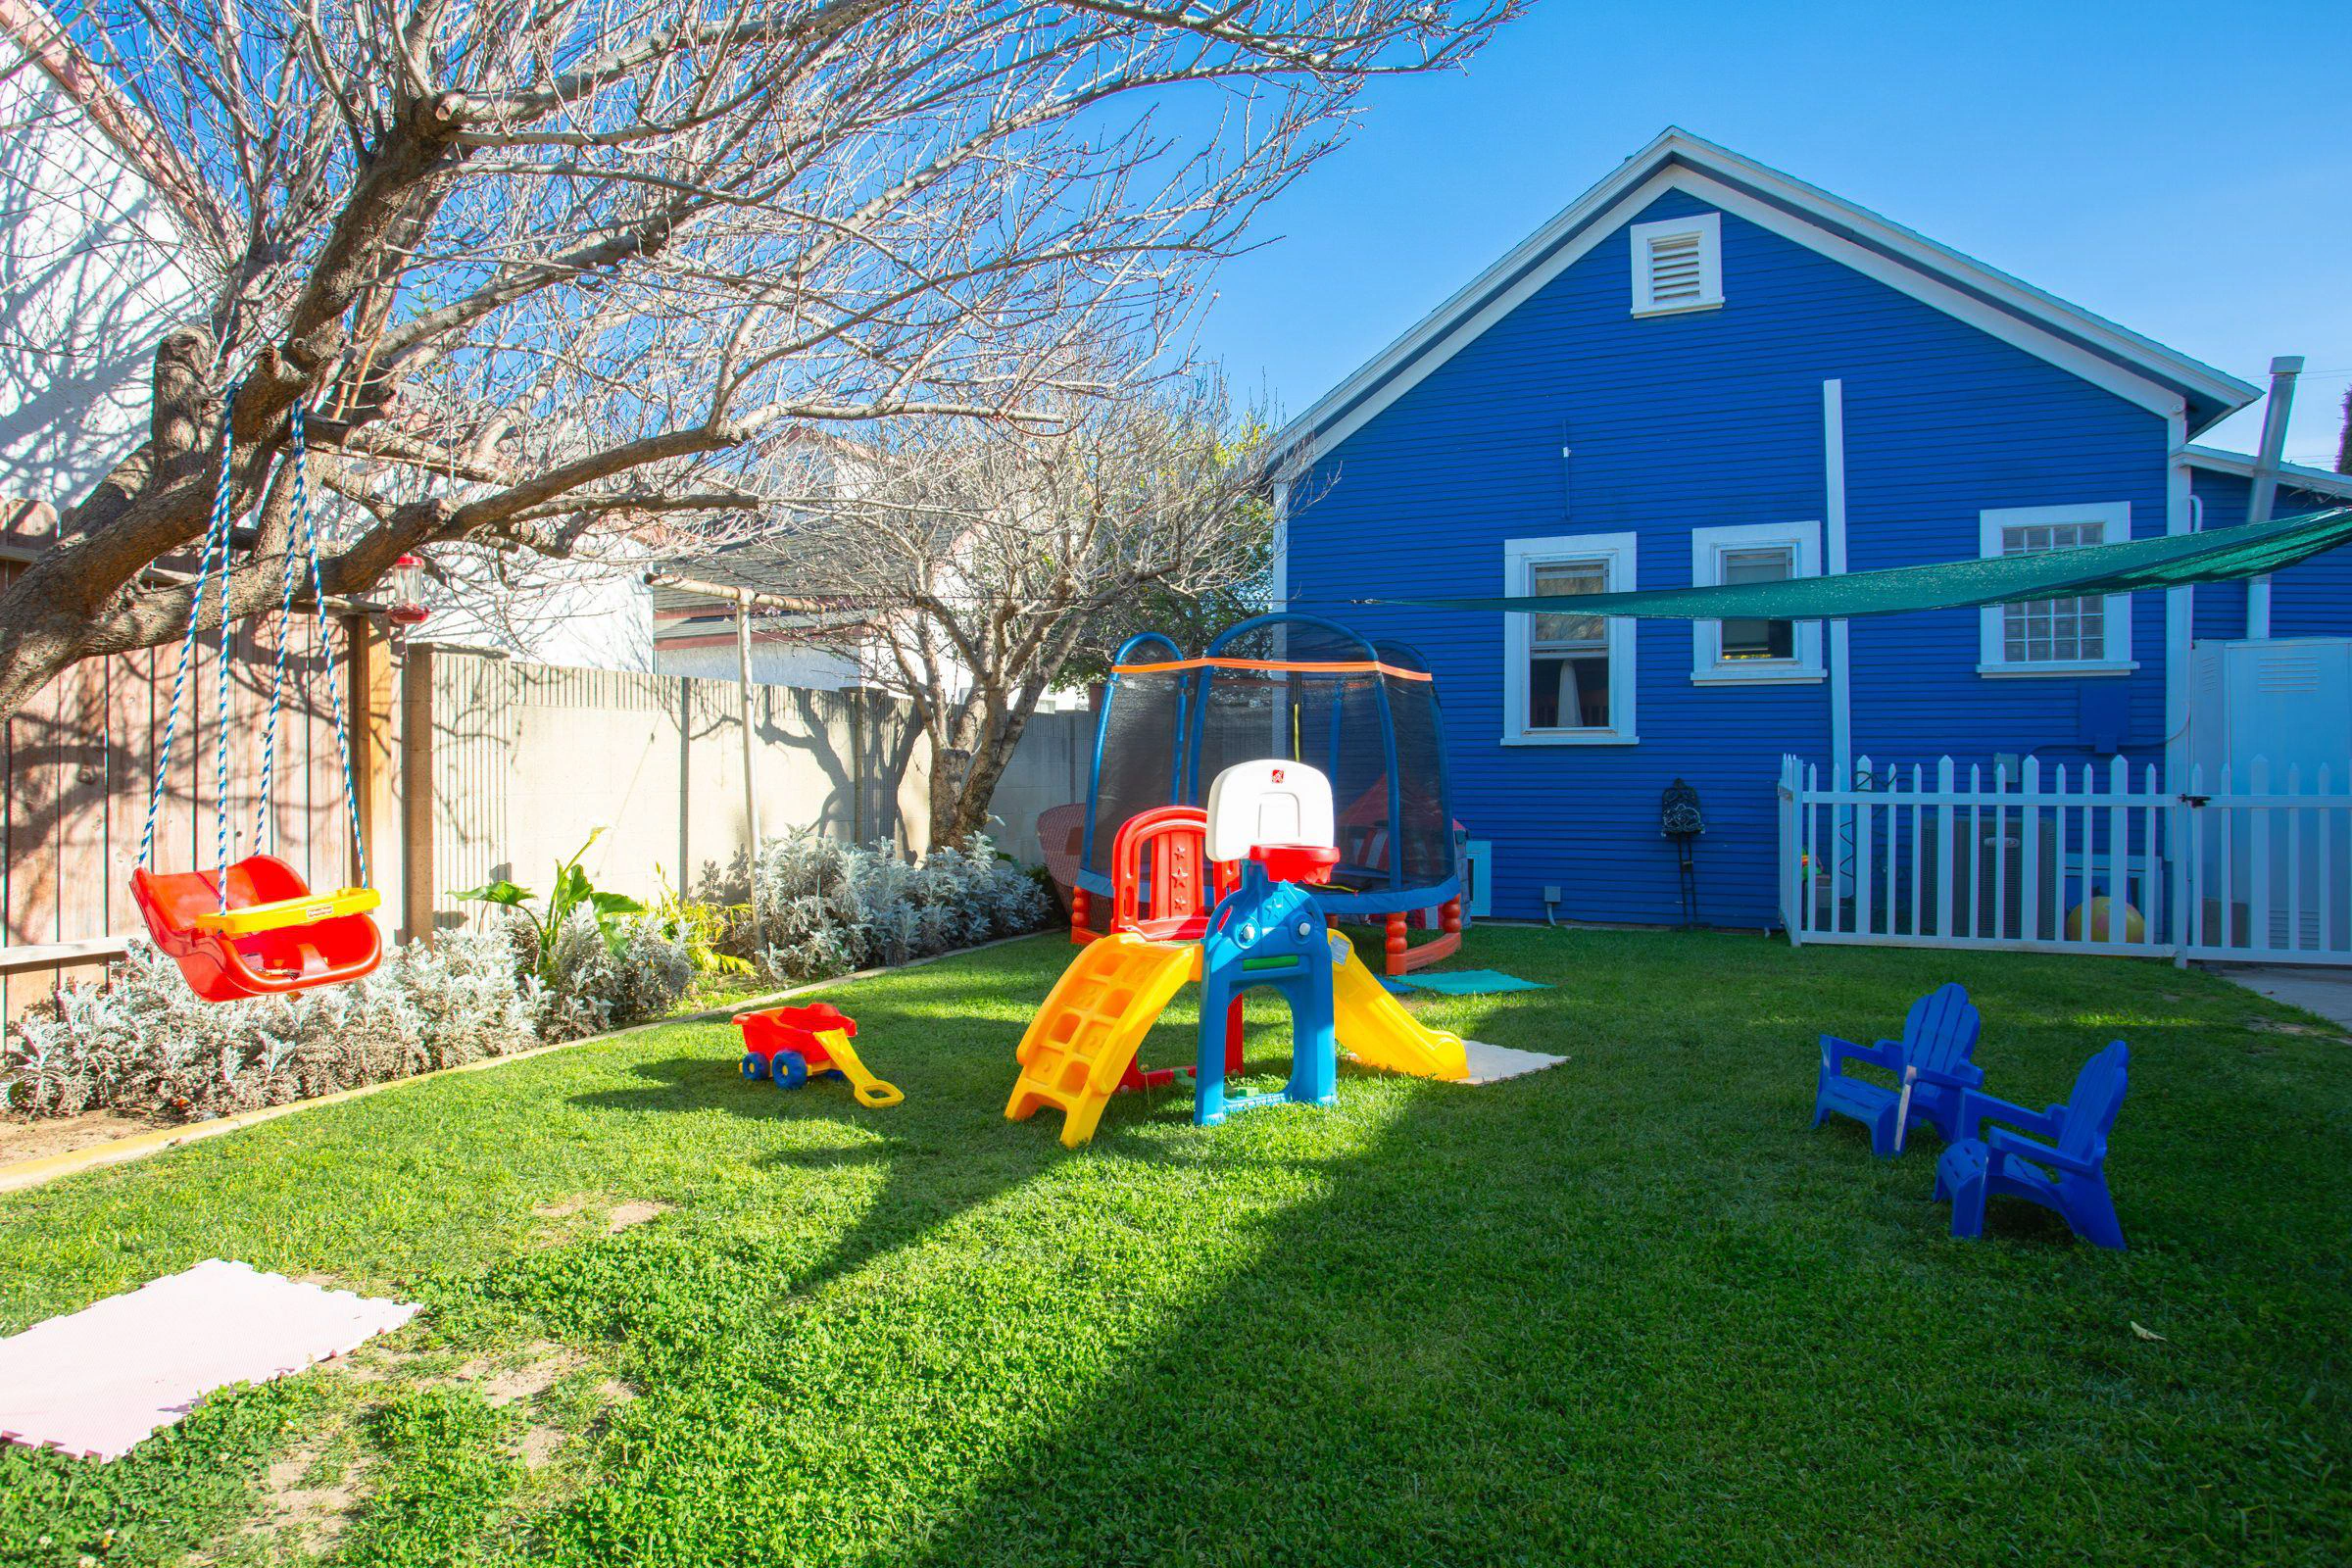 A typical Upwards daycare provides home-based familiarity for kids, combining early childhood curriculum and play elements for the best childcare environment.